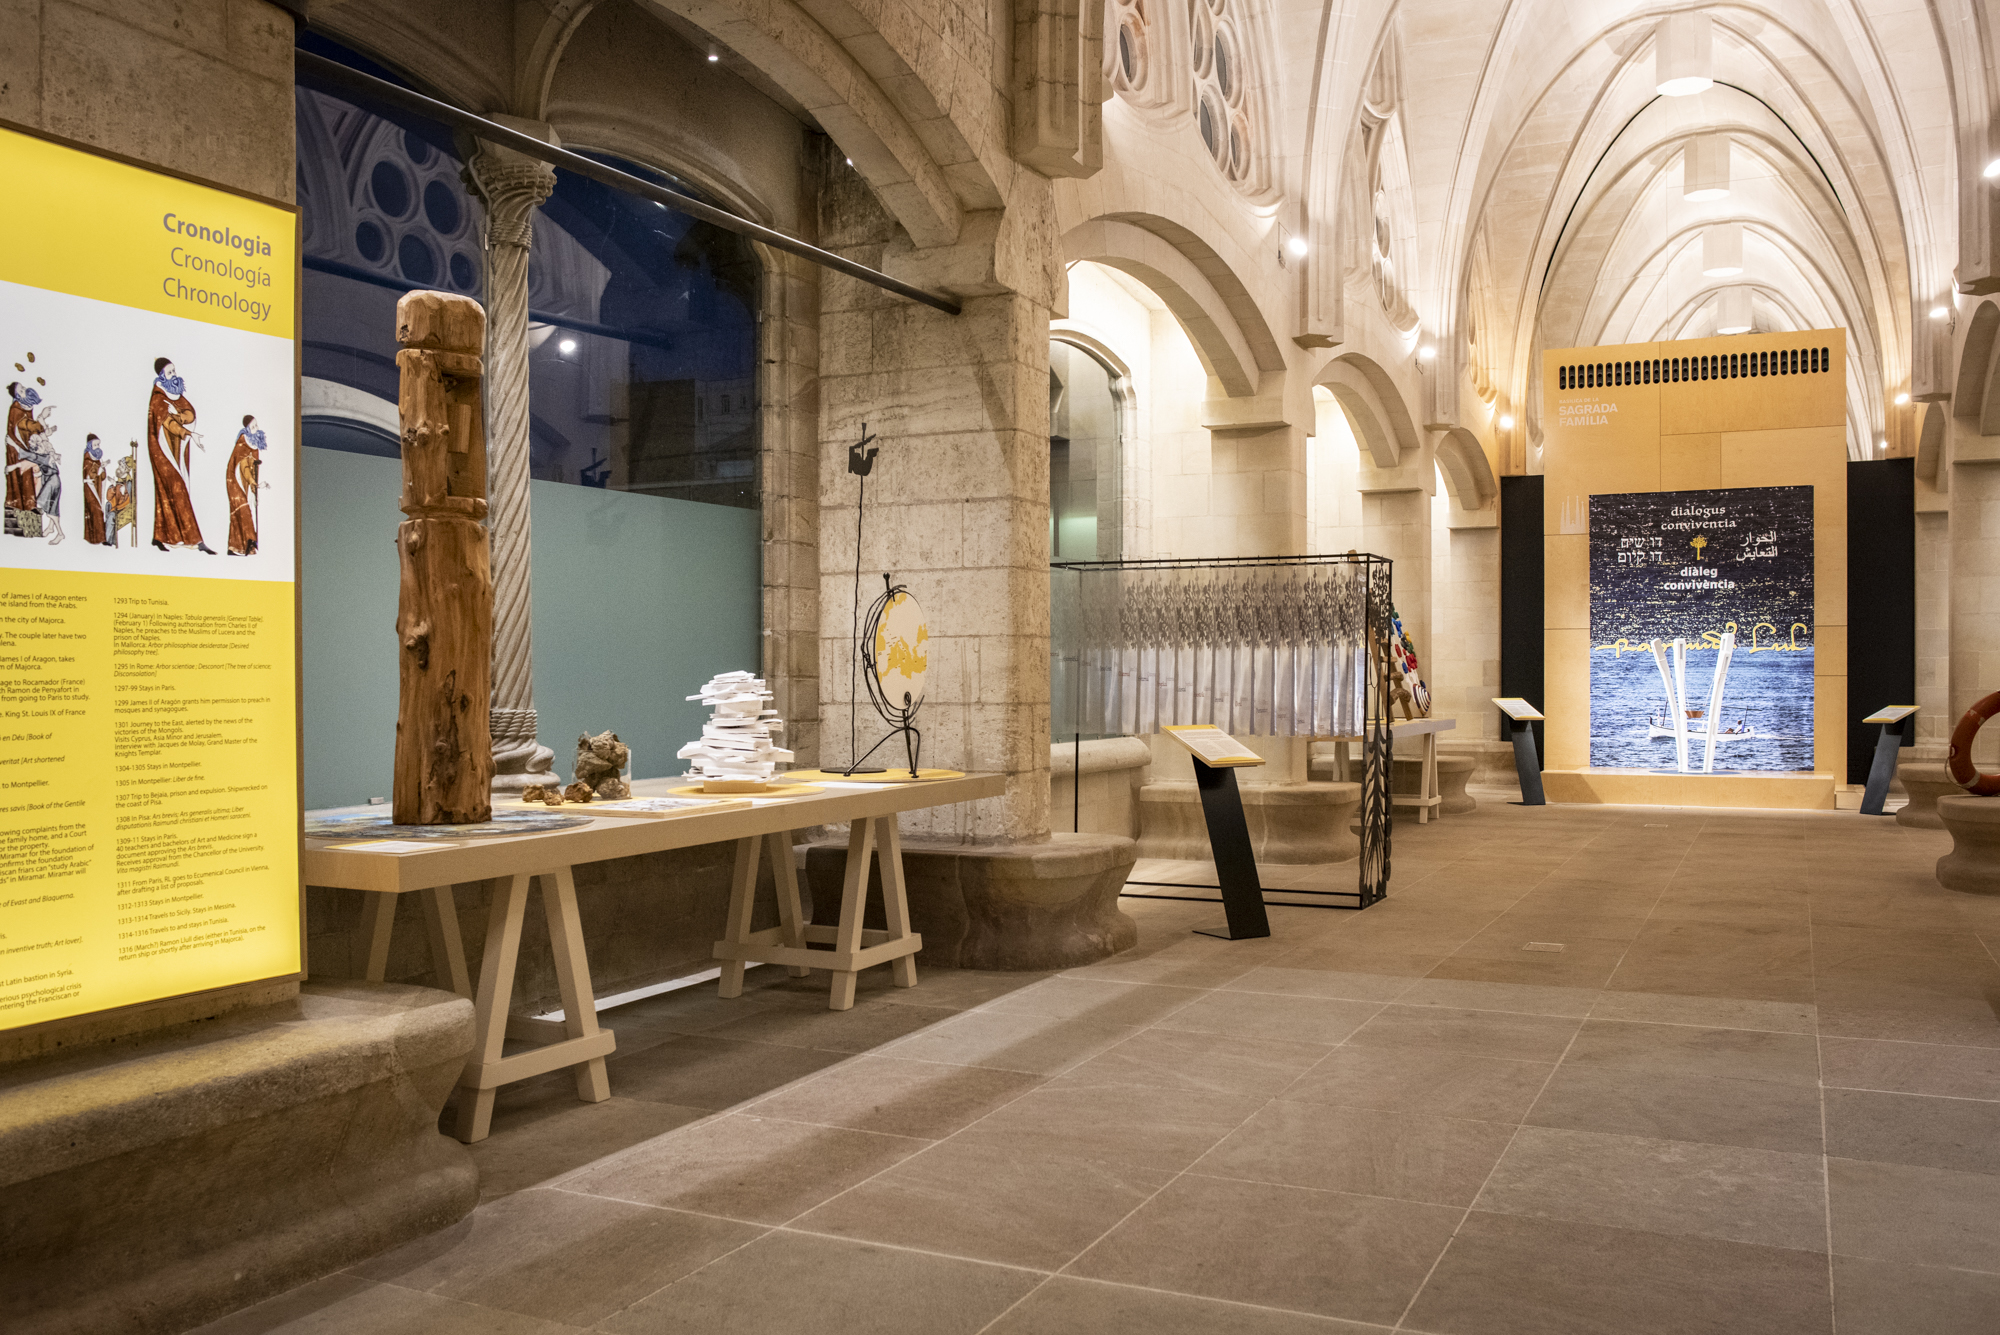 “Ramon Llull: 700 Years of his Mission” exhibition comes to Sagrada Família